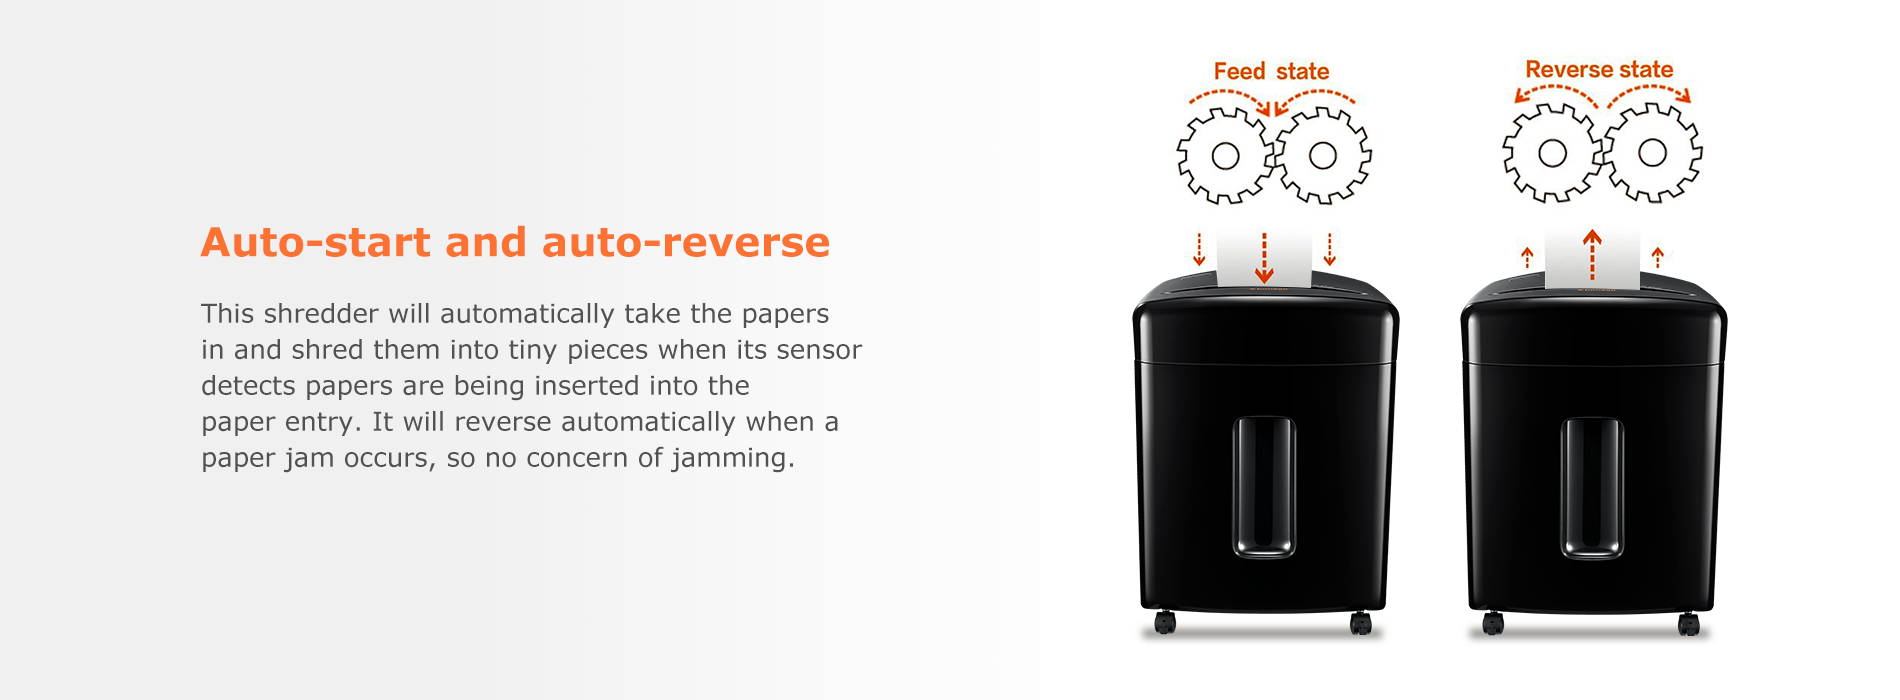 Auto-start and auto-reverse  This shredder will automatically take the papers in and shred them into tiny pieces when its sensor detects papers are being inserted into the paper entry. It will reverse automatically when a paper jam occurs, so no concern of jamming.